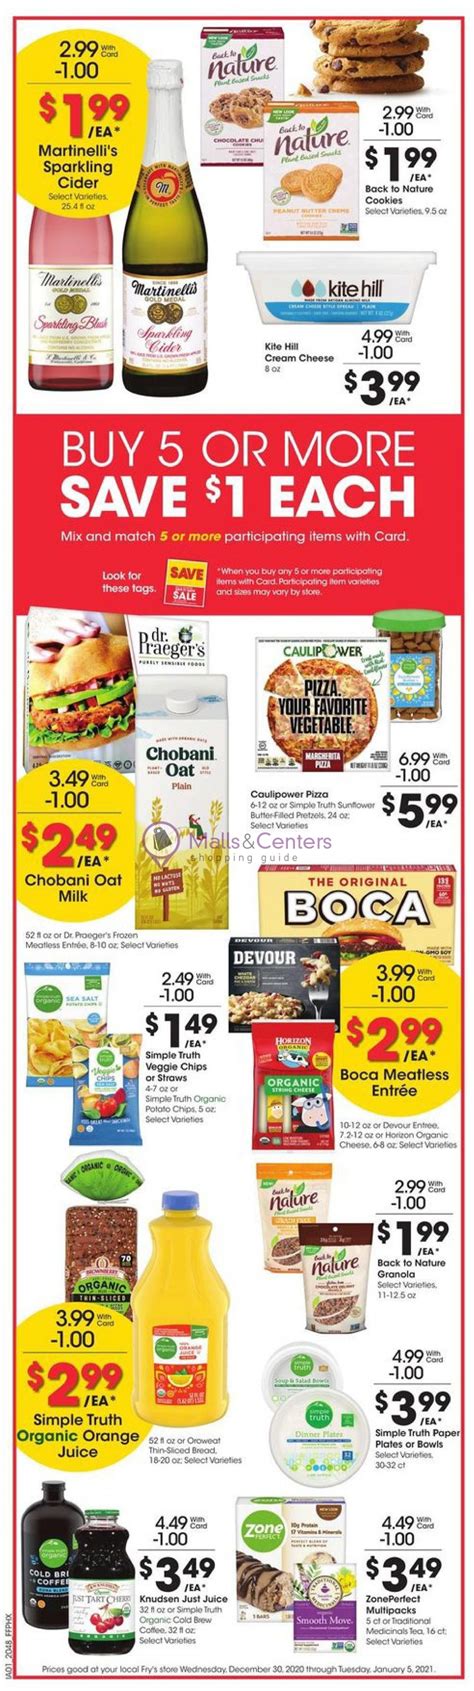 Find fry's food weekly ads, circulars and weekly specials. Fry's Food Stores Weekly ad valid from 12/30/2020 to 01/05 ...